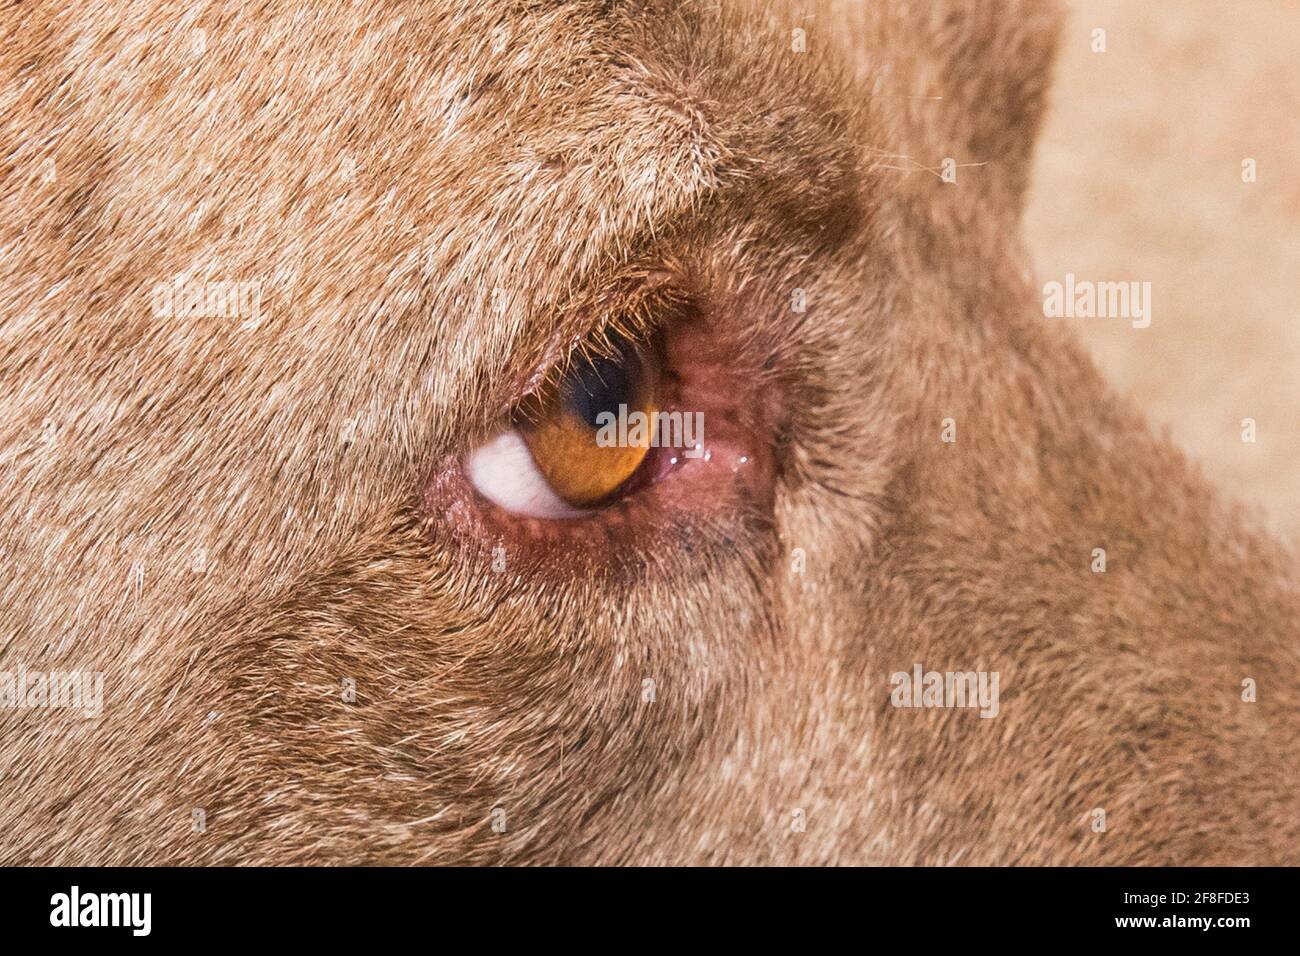 Eye of a pit bull terrier dog animal, close up. Stock Photo